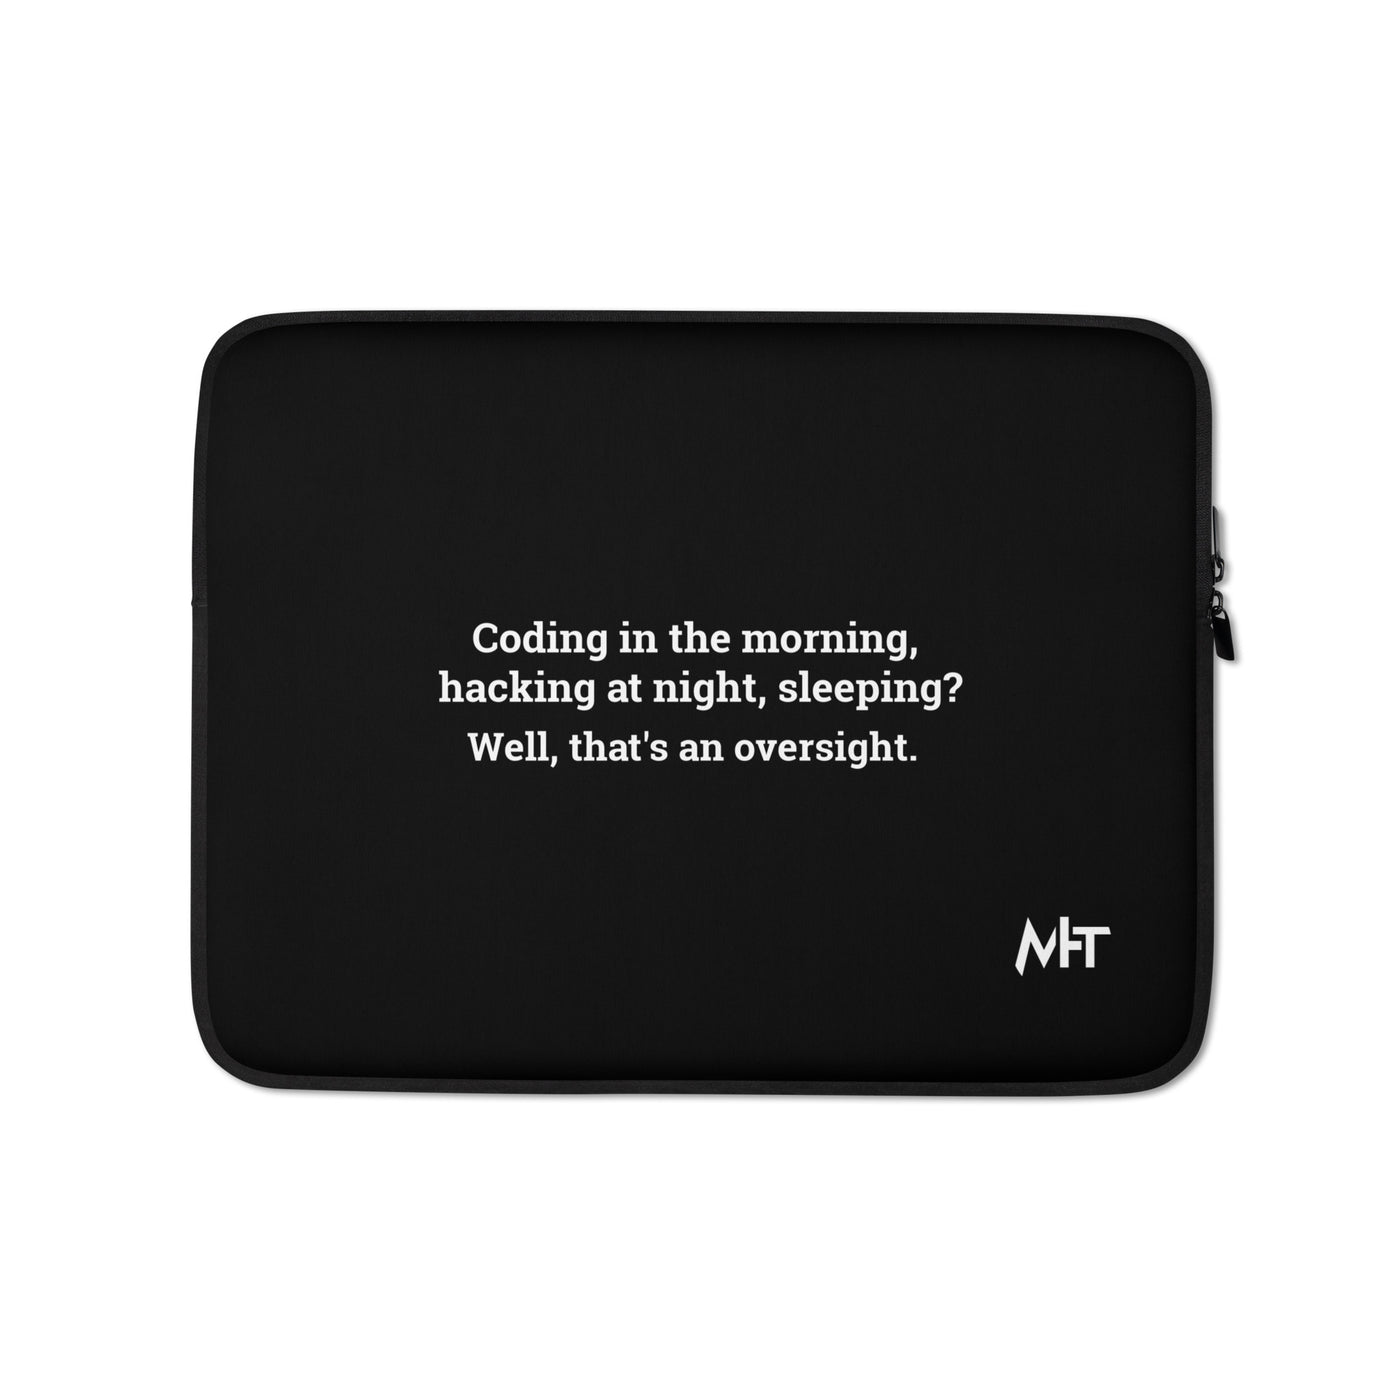 Coding in the morning, hacking at night - Laptop Sleeve